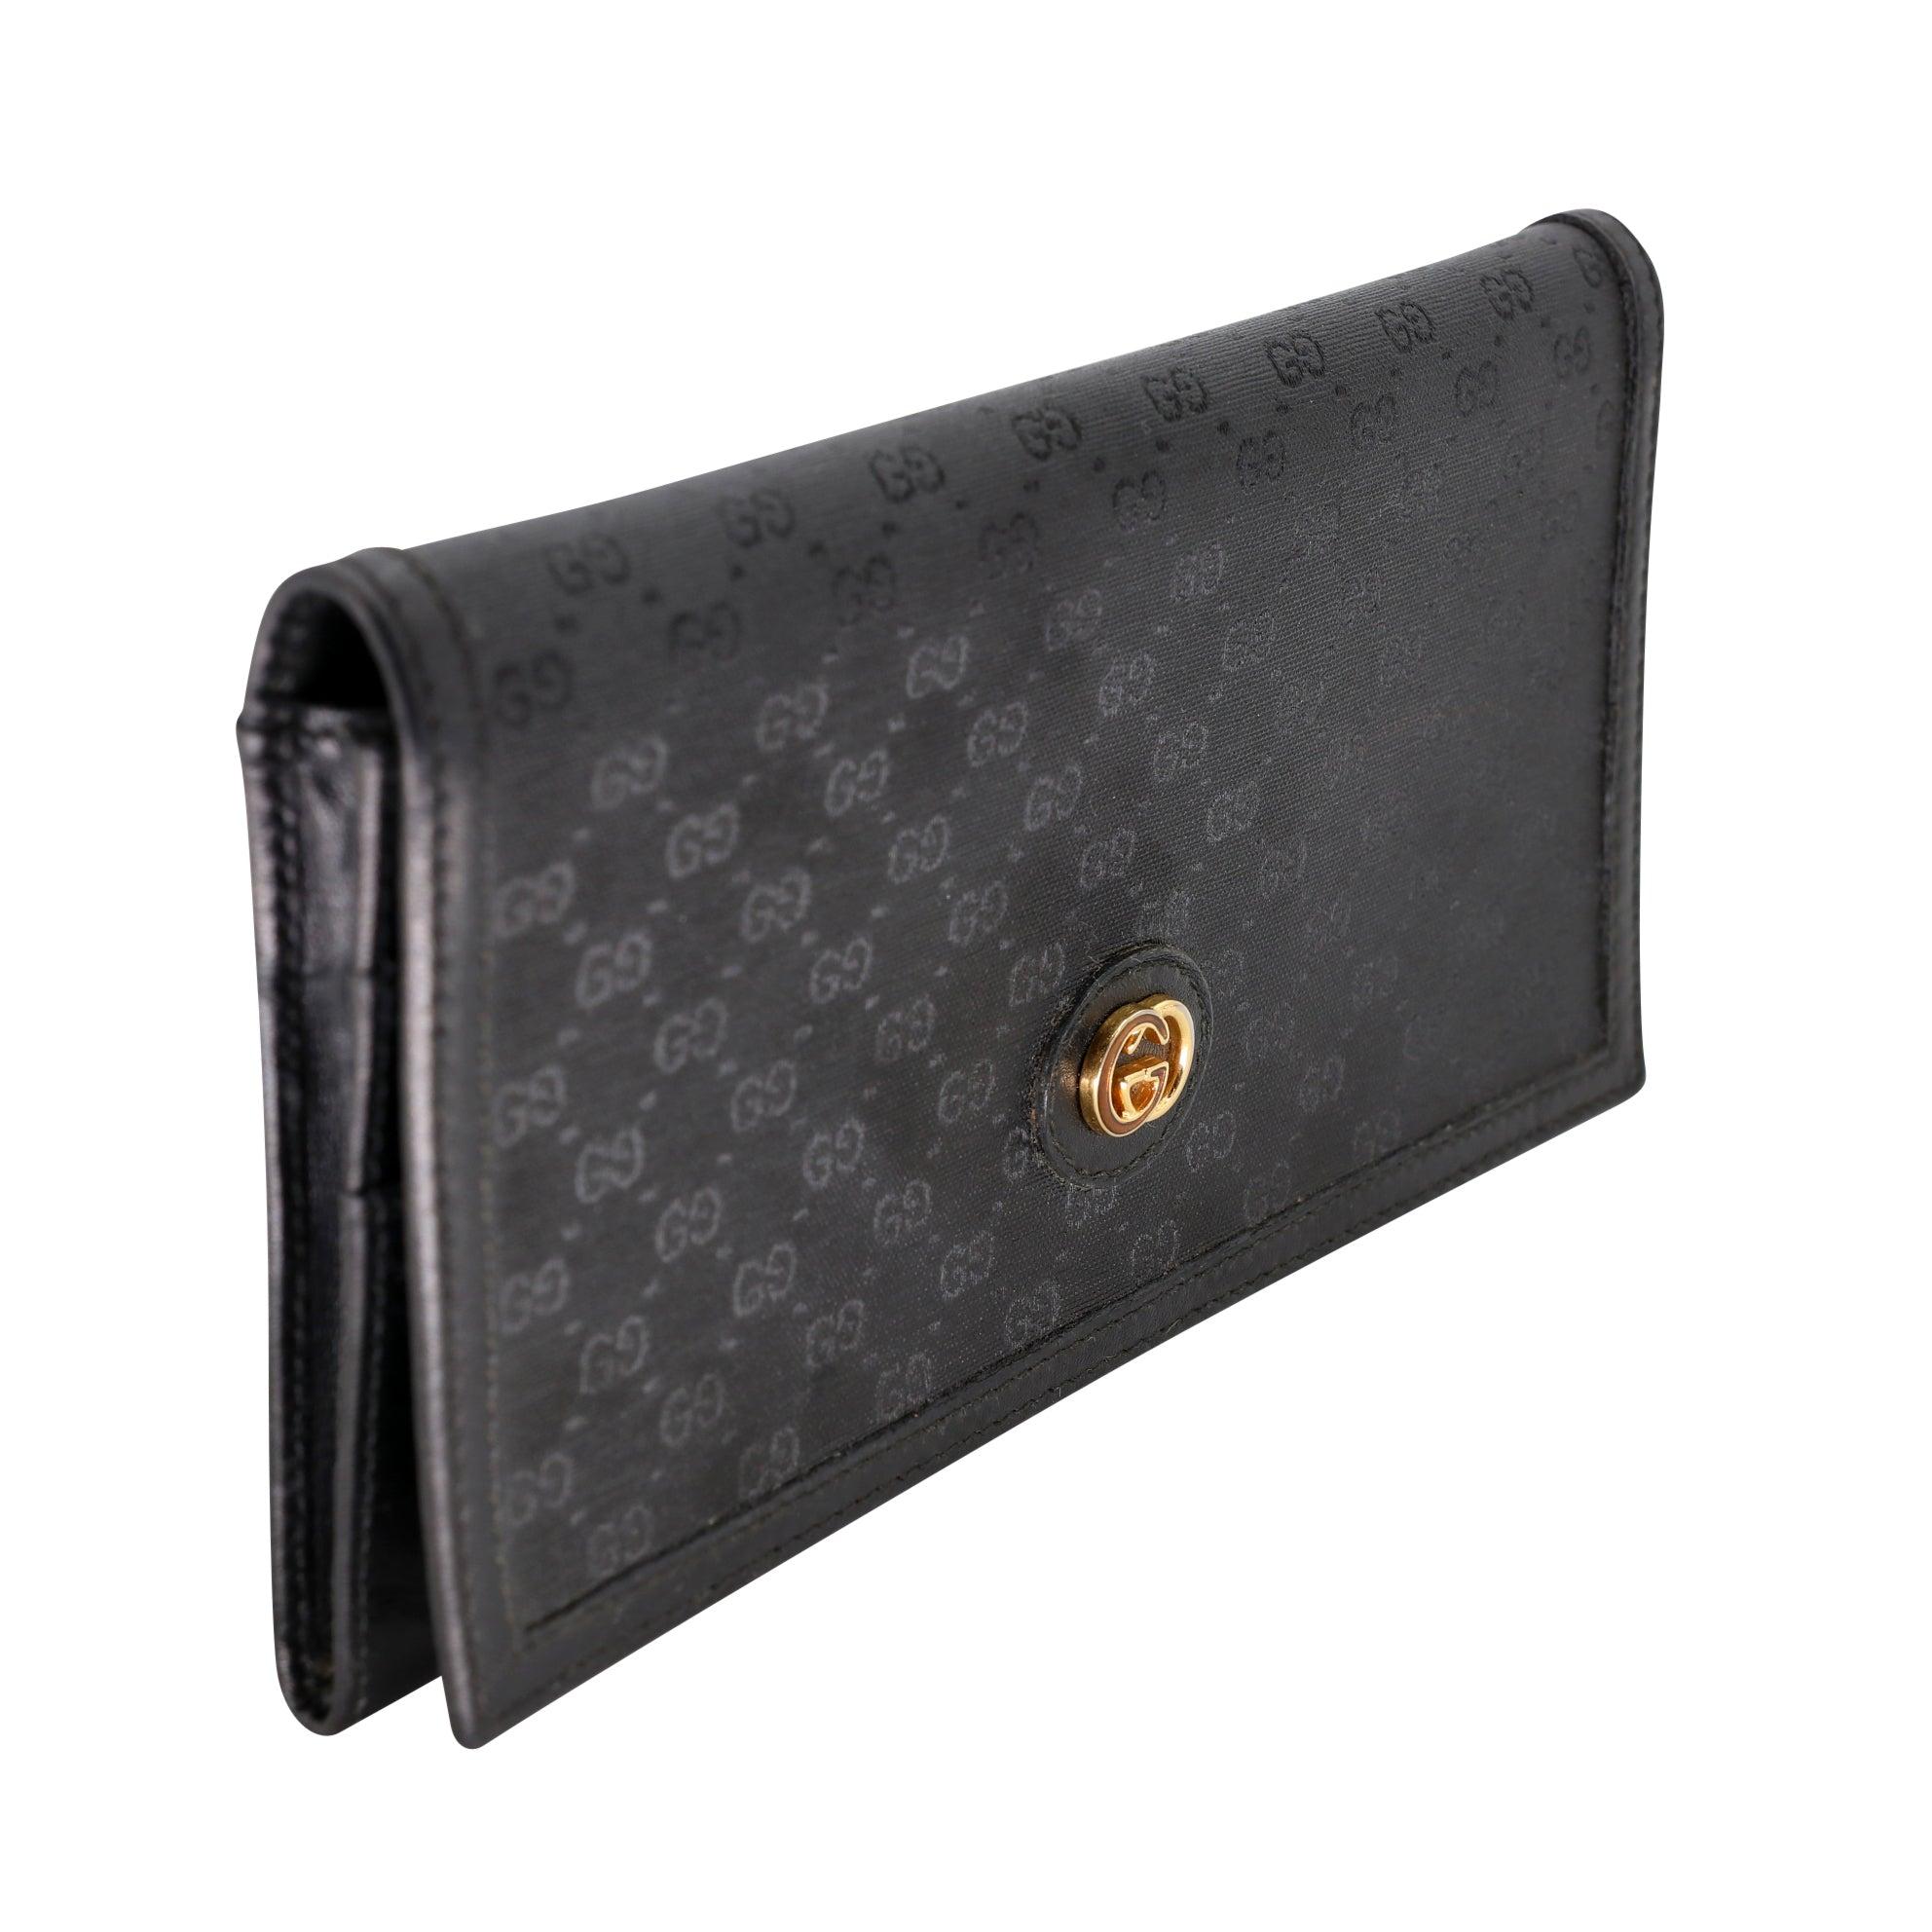 The Italian fashion house of Gucci continues to reinterpret its rich heritage with decidedly modern, yet classic designs. This wallet features the distinctive GG gold metal logo. Wallet is in pre-loved condition with basic wear there is some scuffs